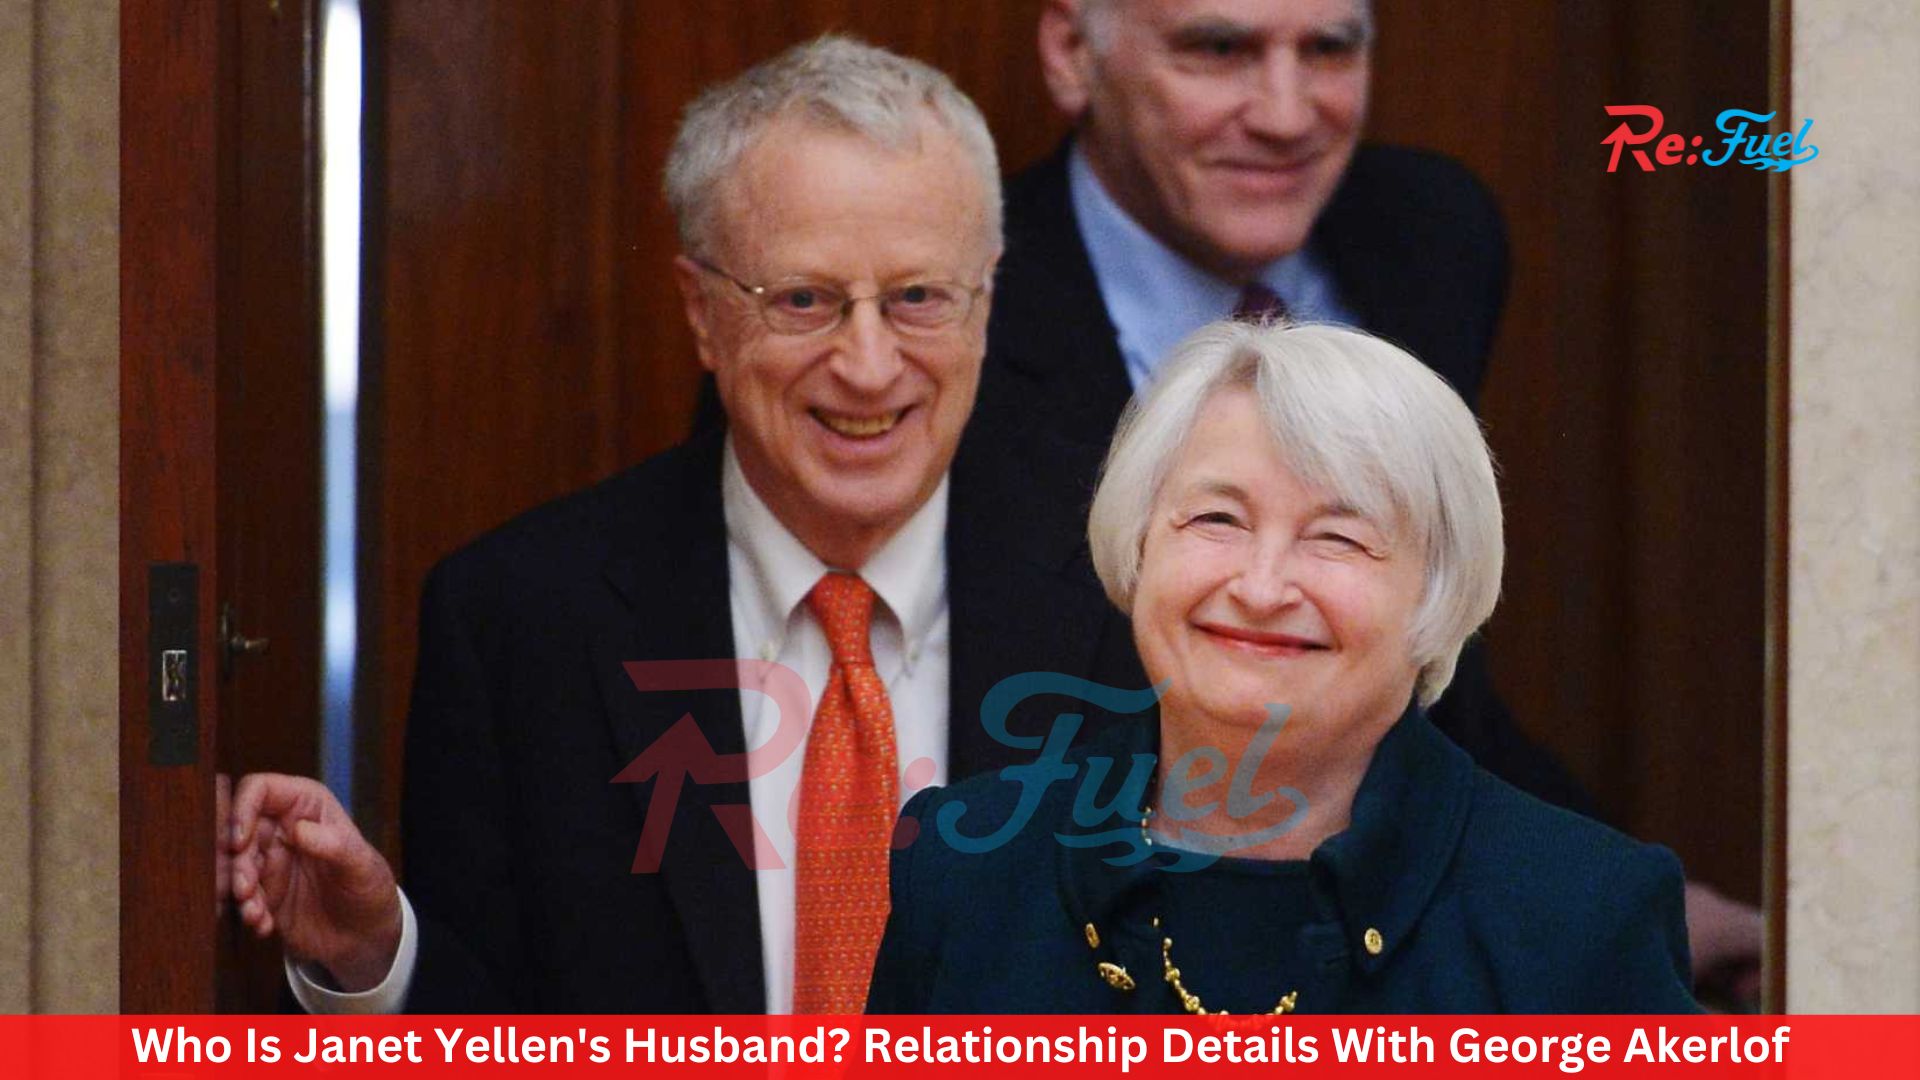 Who Is Janet Yellen's Husband? Relationship Details With George Akerlof